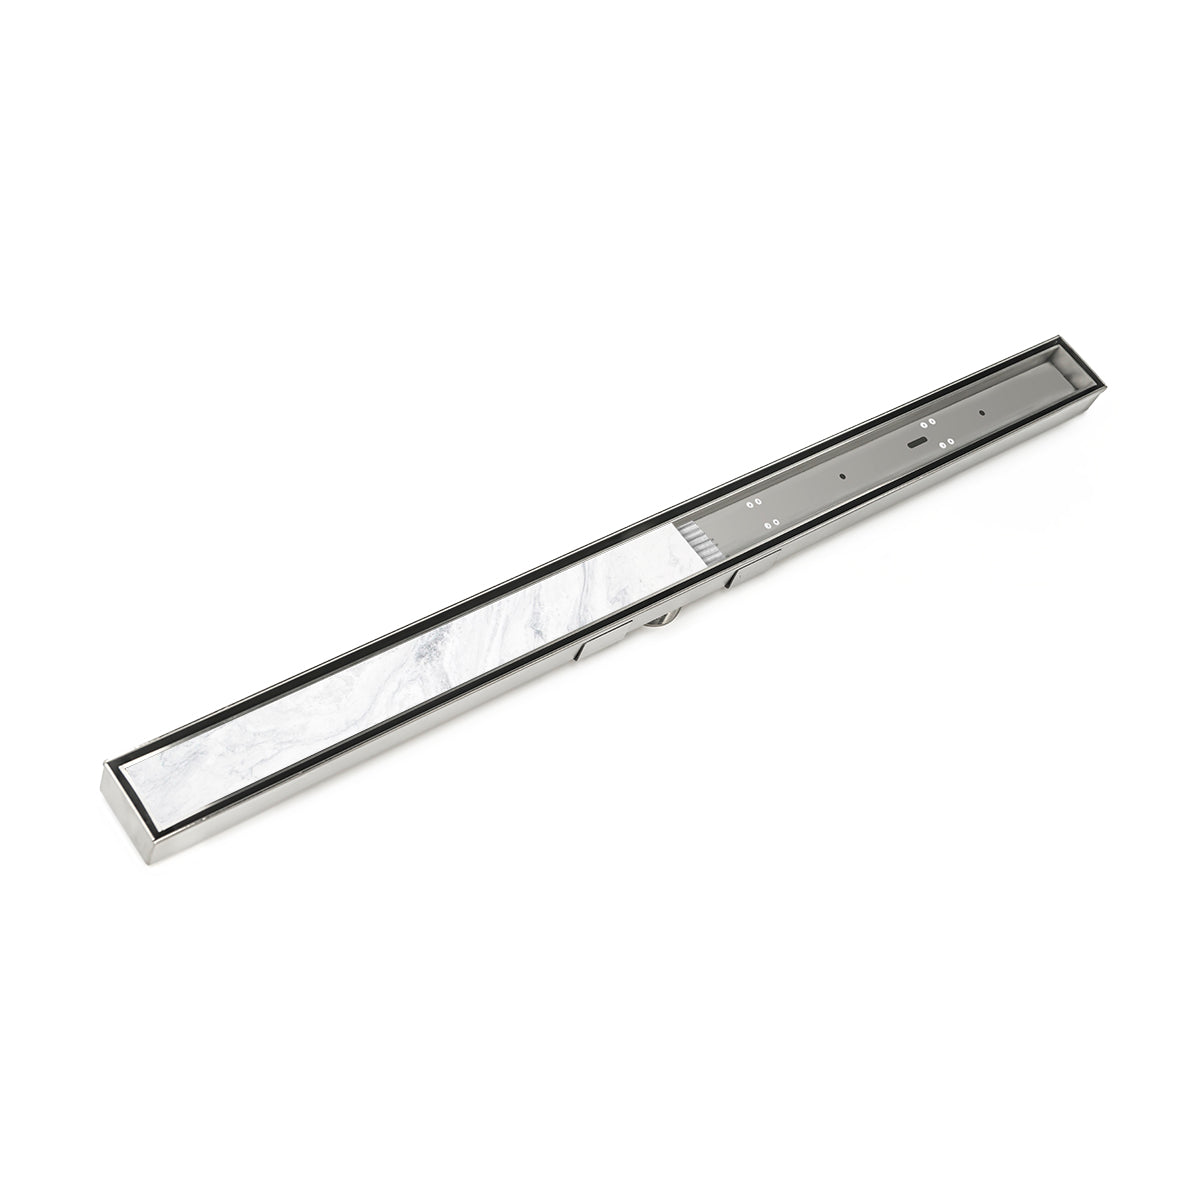 Infinity Drain 60" S-Stainless Steel Series High Flow Site Sizable Linear Drain Kit with Low Profile Tile Insert Frame with PVC Drain Body, 3" Outlet